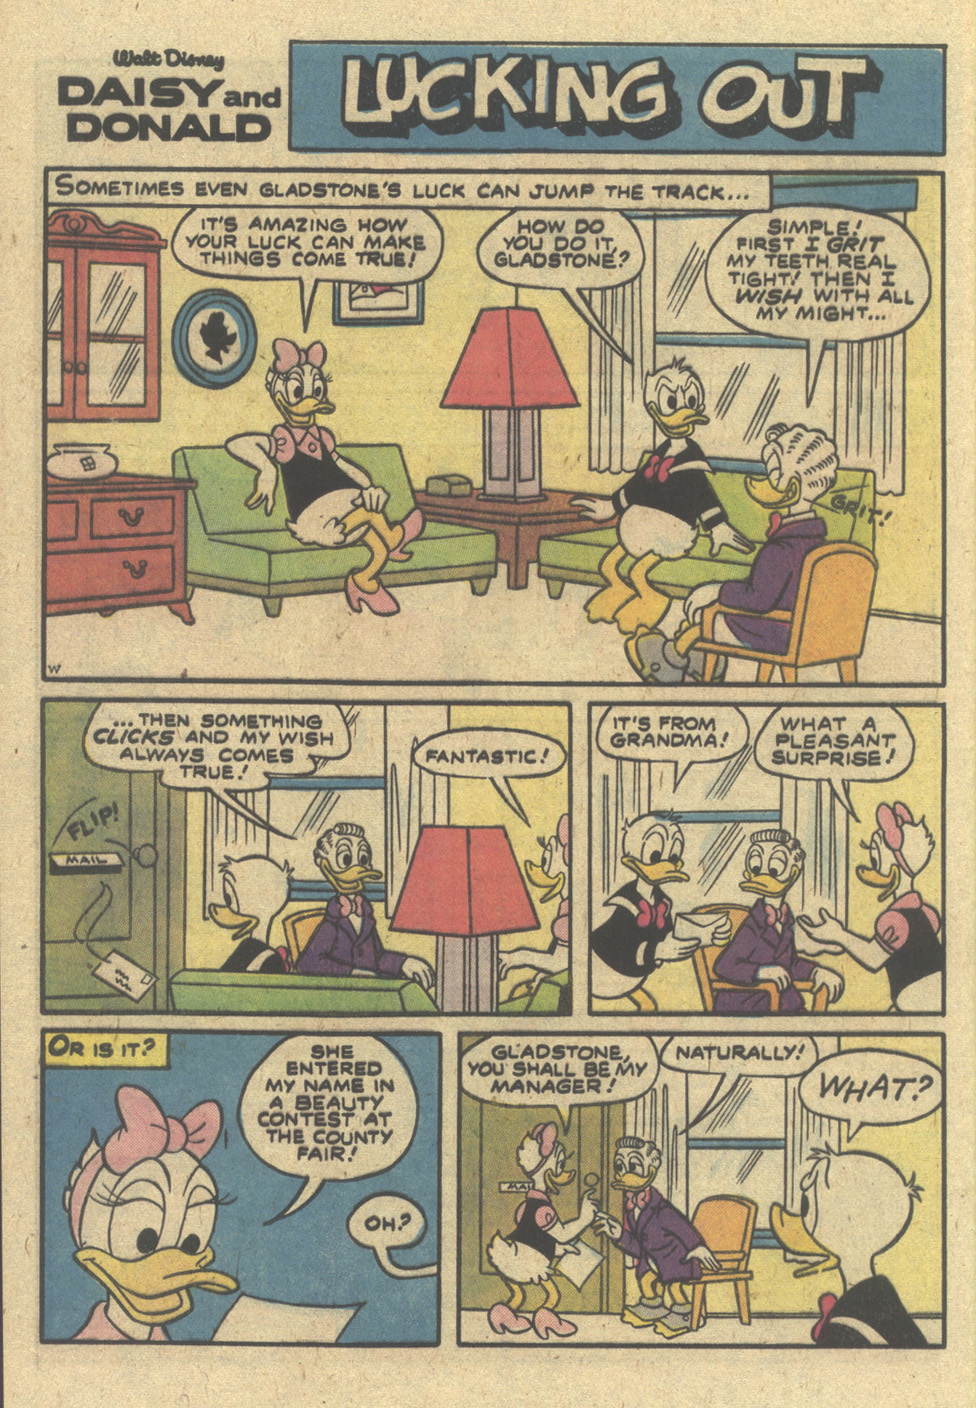 Read online Walt Disney Daisy and Donald comic -  Issue #31 - 28